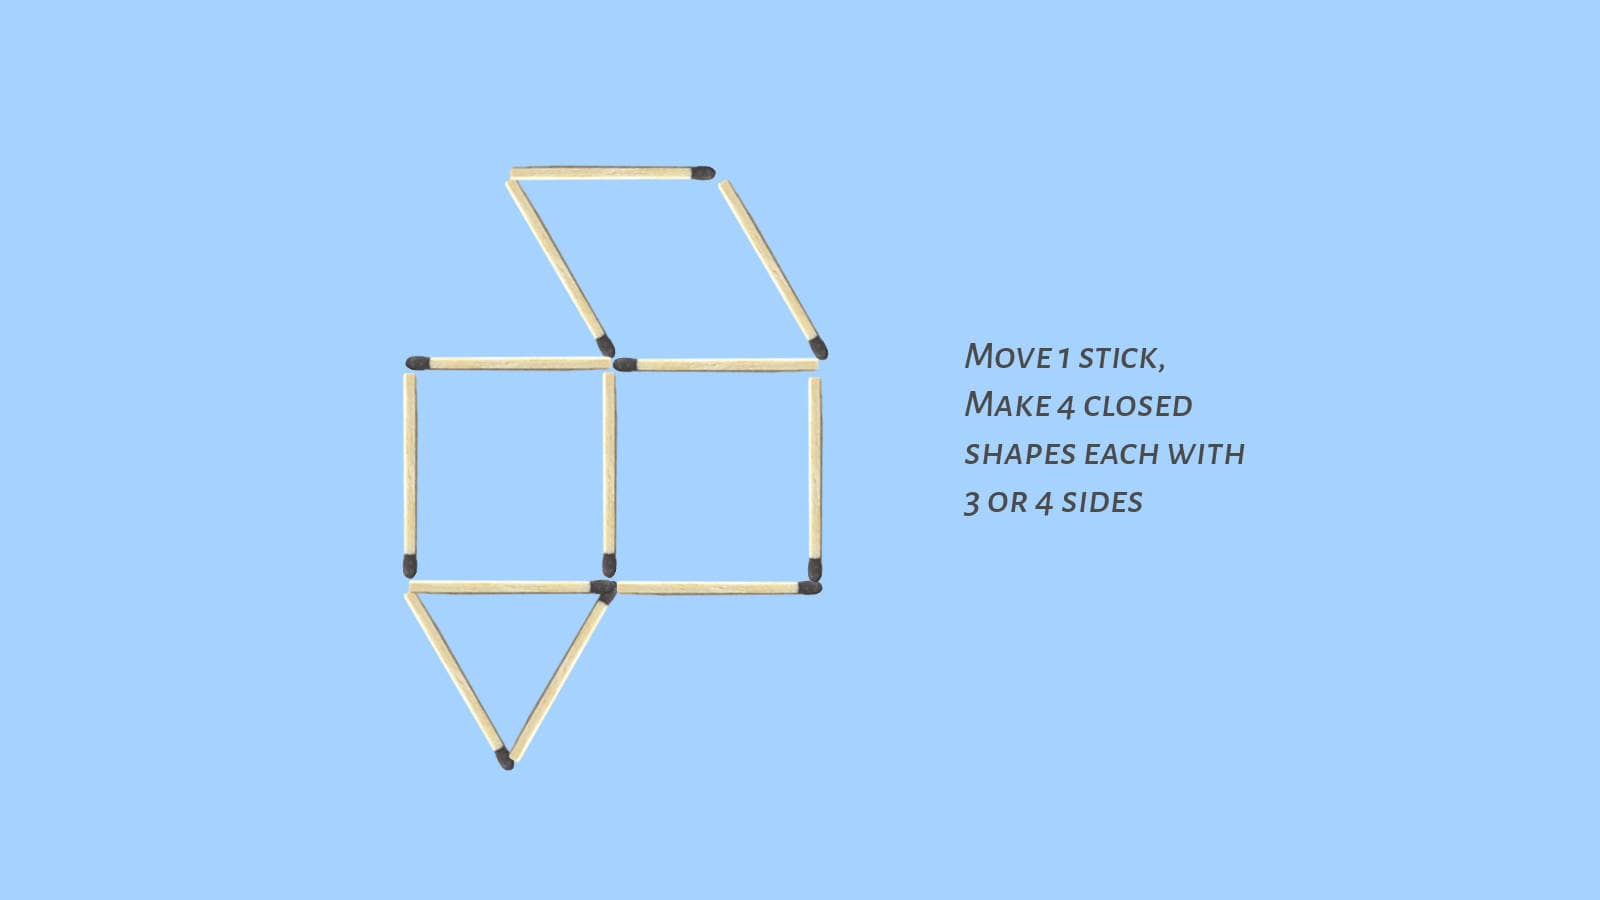 Move 1 stick to make 4 matchstick shapes matchstick puzzle